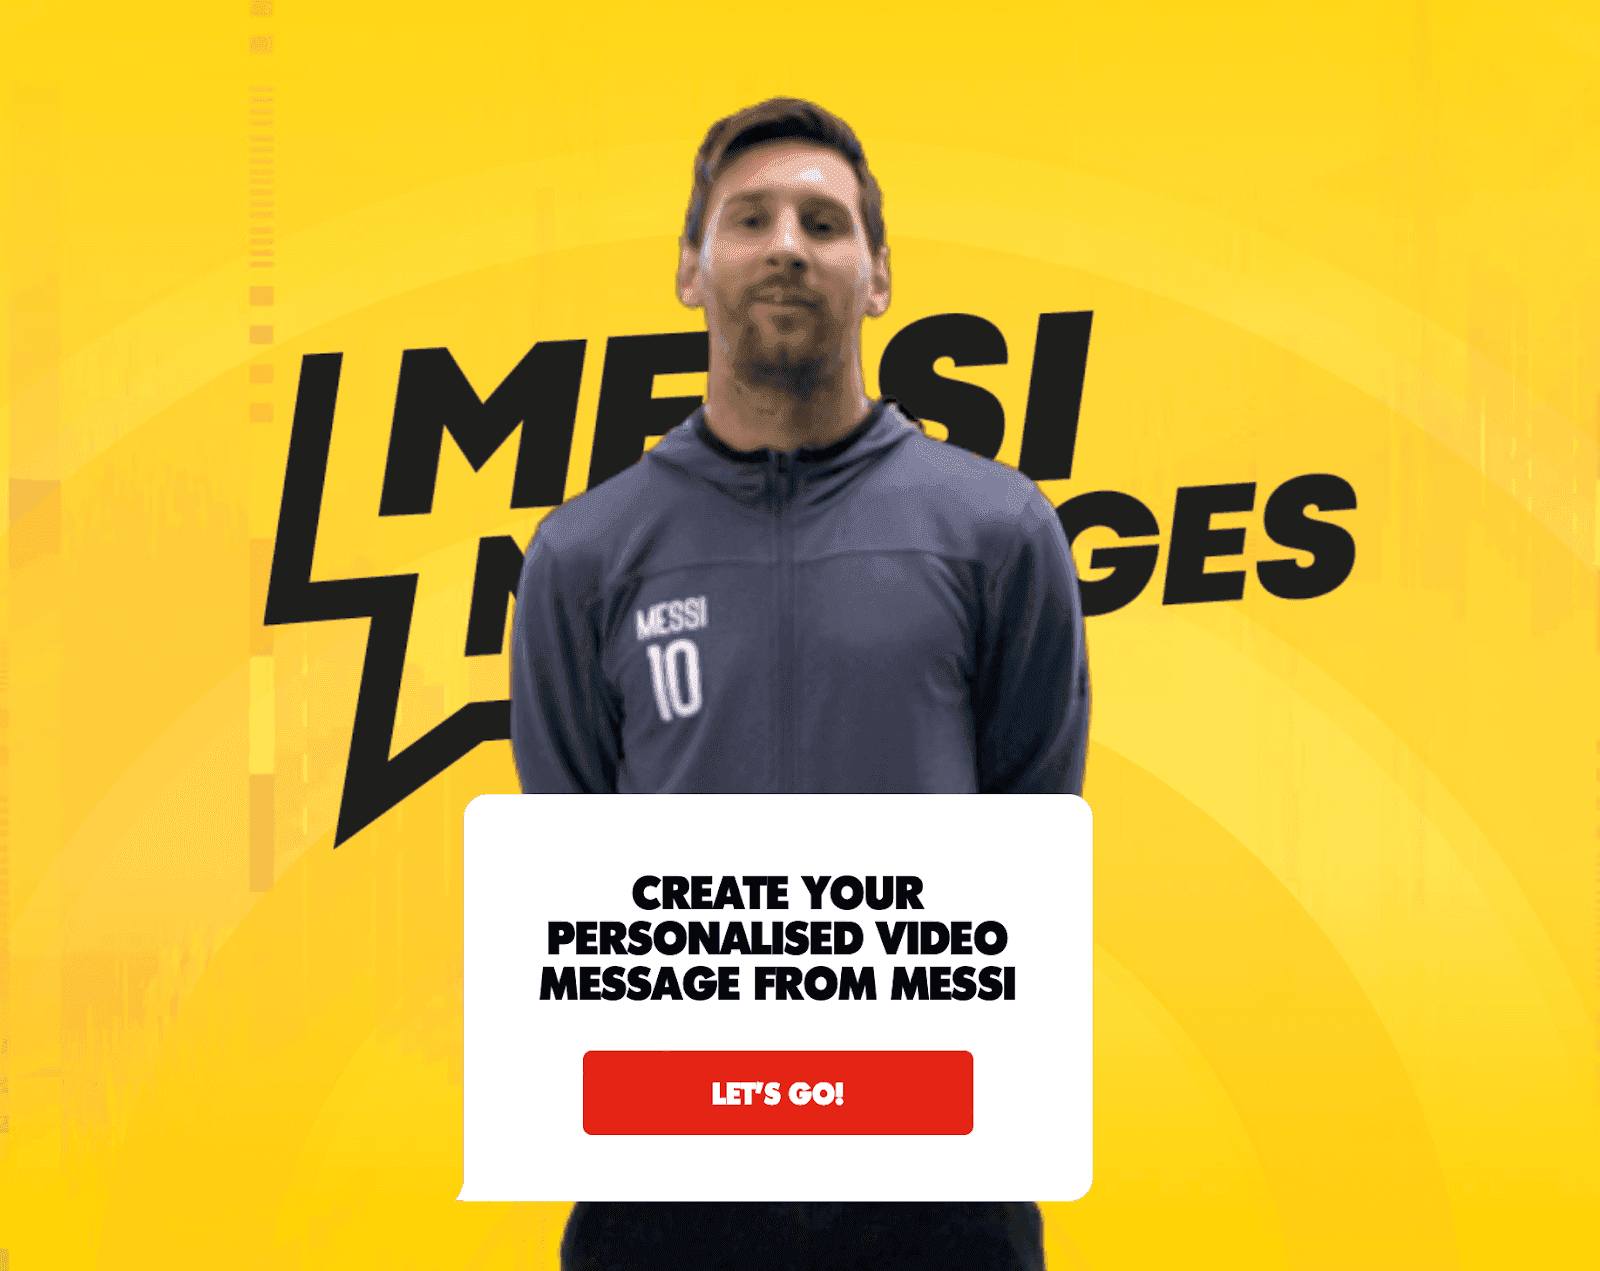 "Create your personalized video message from Messi" prompt with Messi in background with yellow backdrop